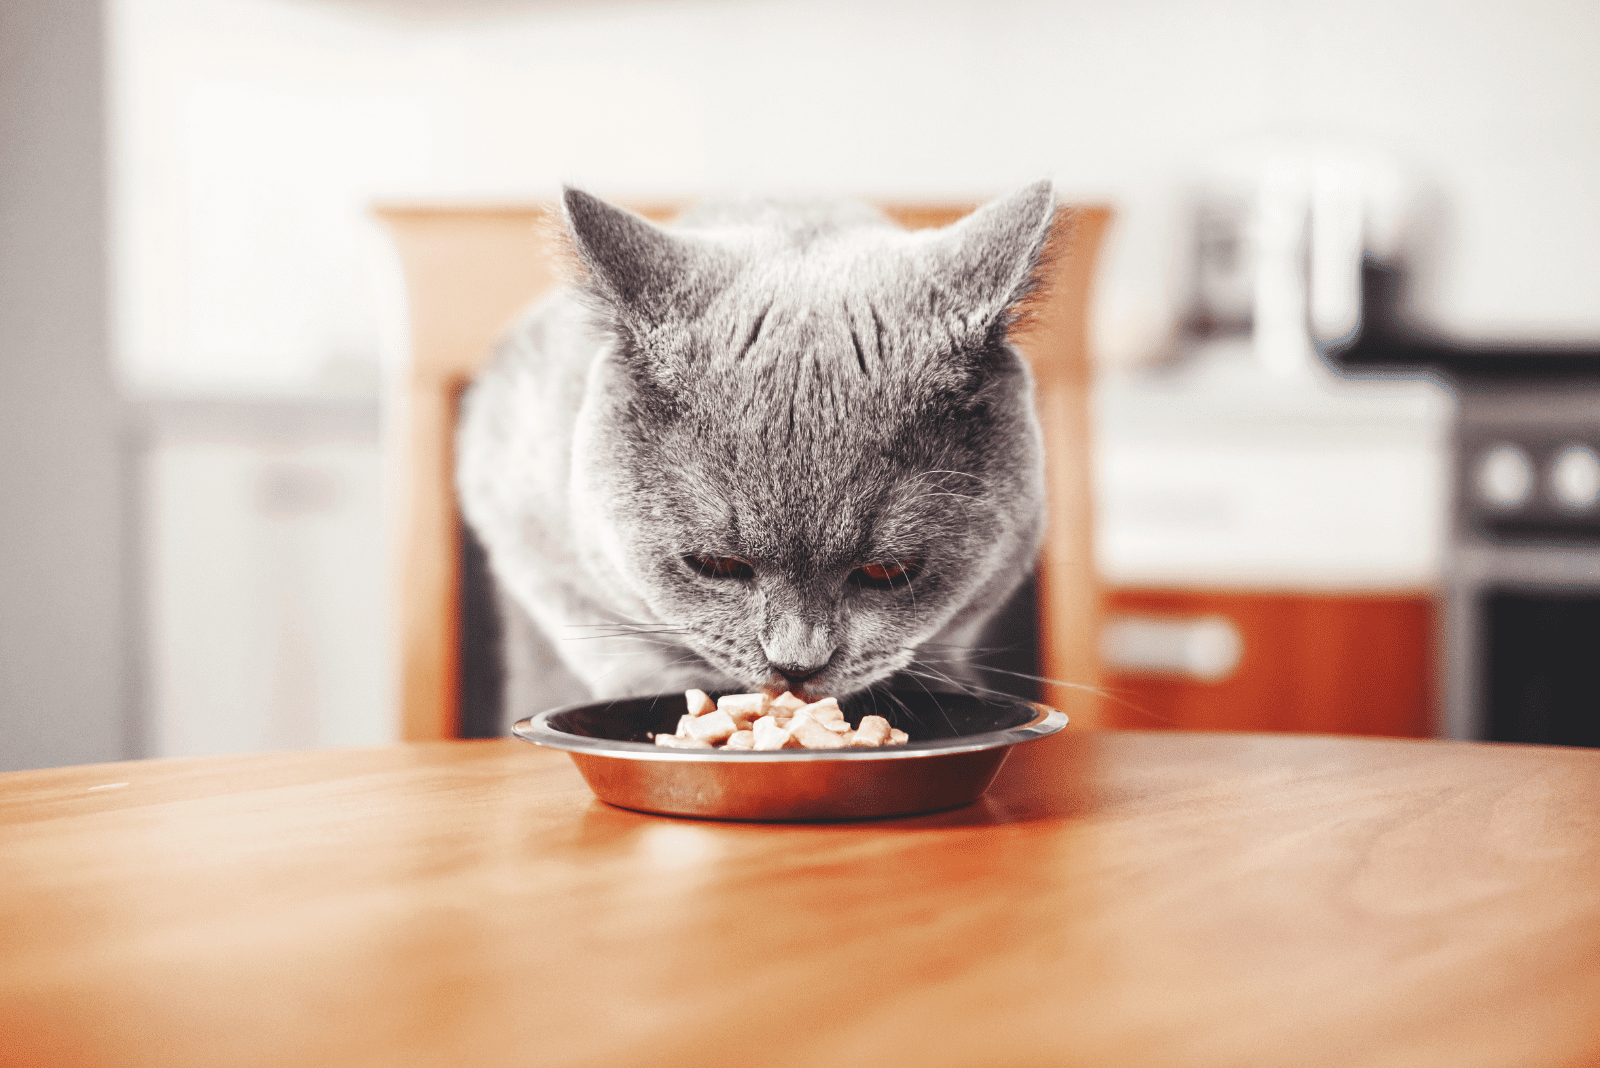 the cat eats from the food bowl